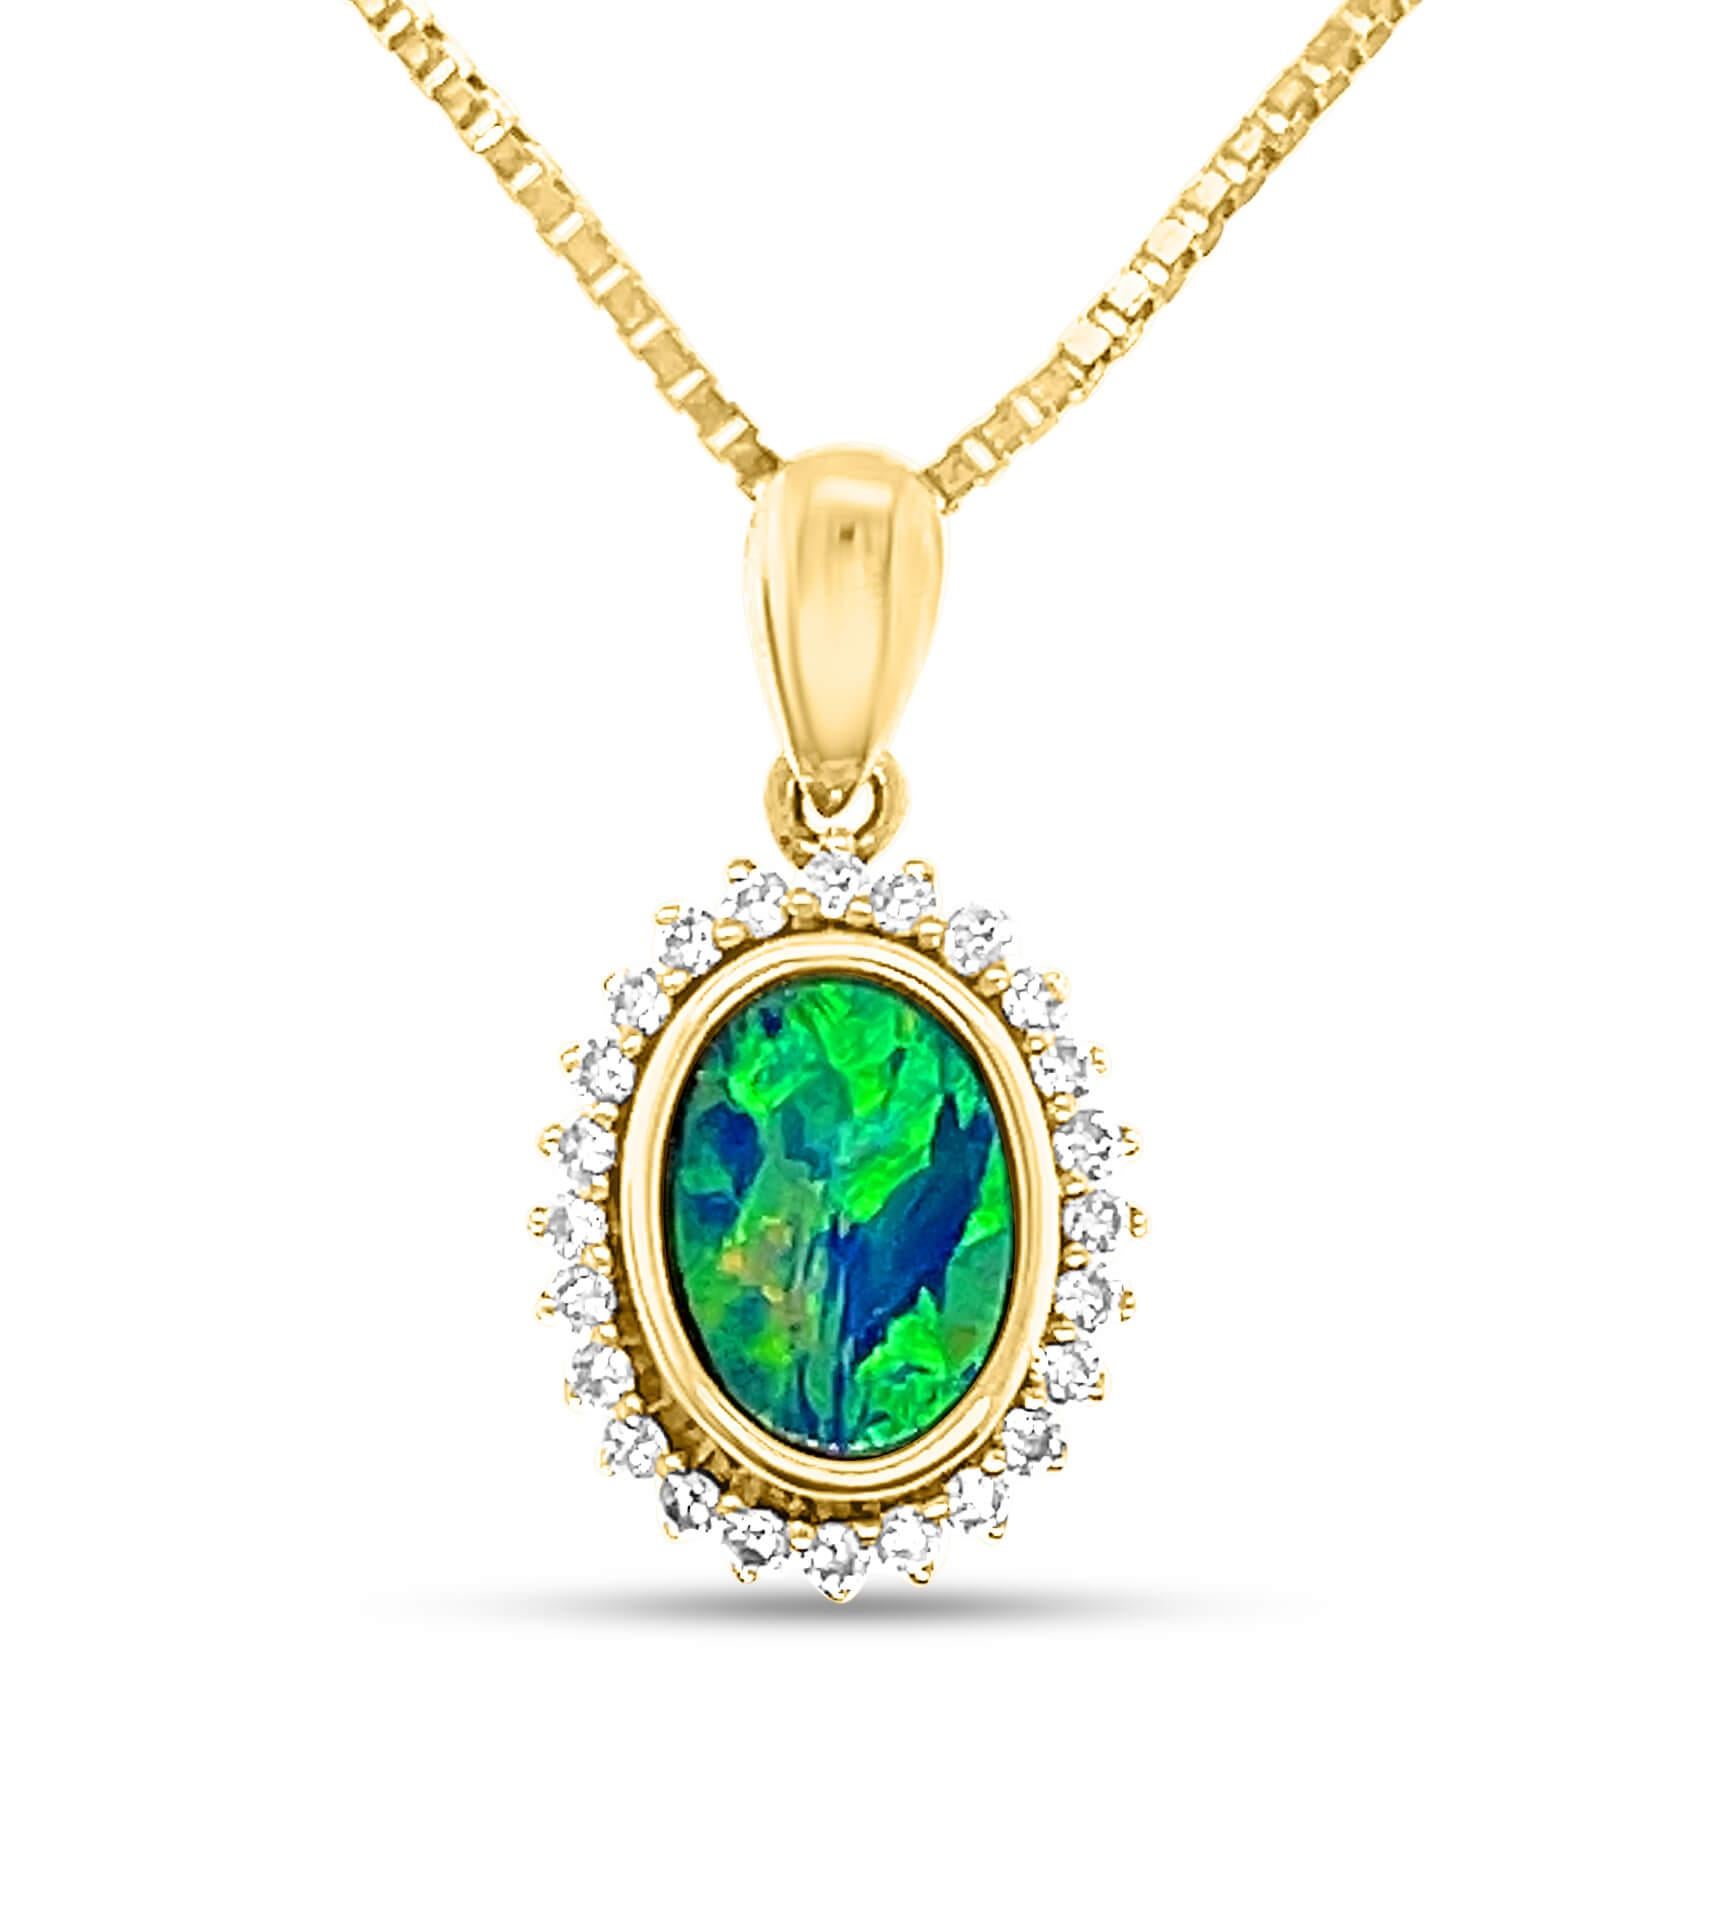 Bold and undeniably grandiose, the ‘Valeria’ opal doublet pendant (0.48 ct) is a piece intended to impress with the gemstone’s intricate play-of-colour nestled by a halo of brilliant cut dainty diamonds. This 18K yellow gold pendant featuring a